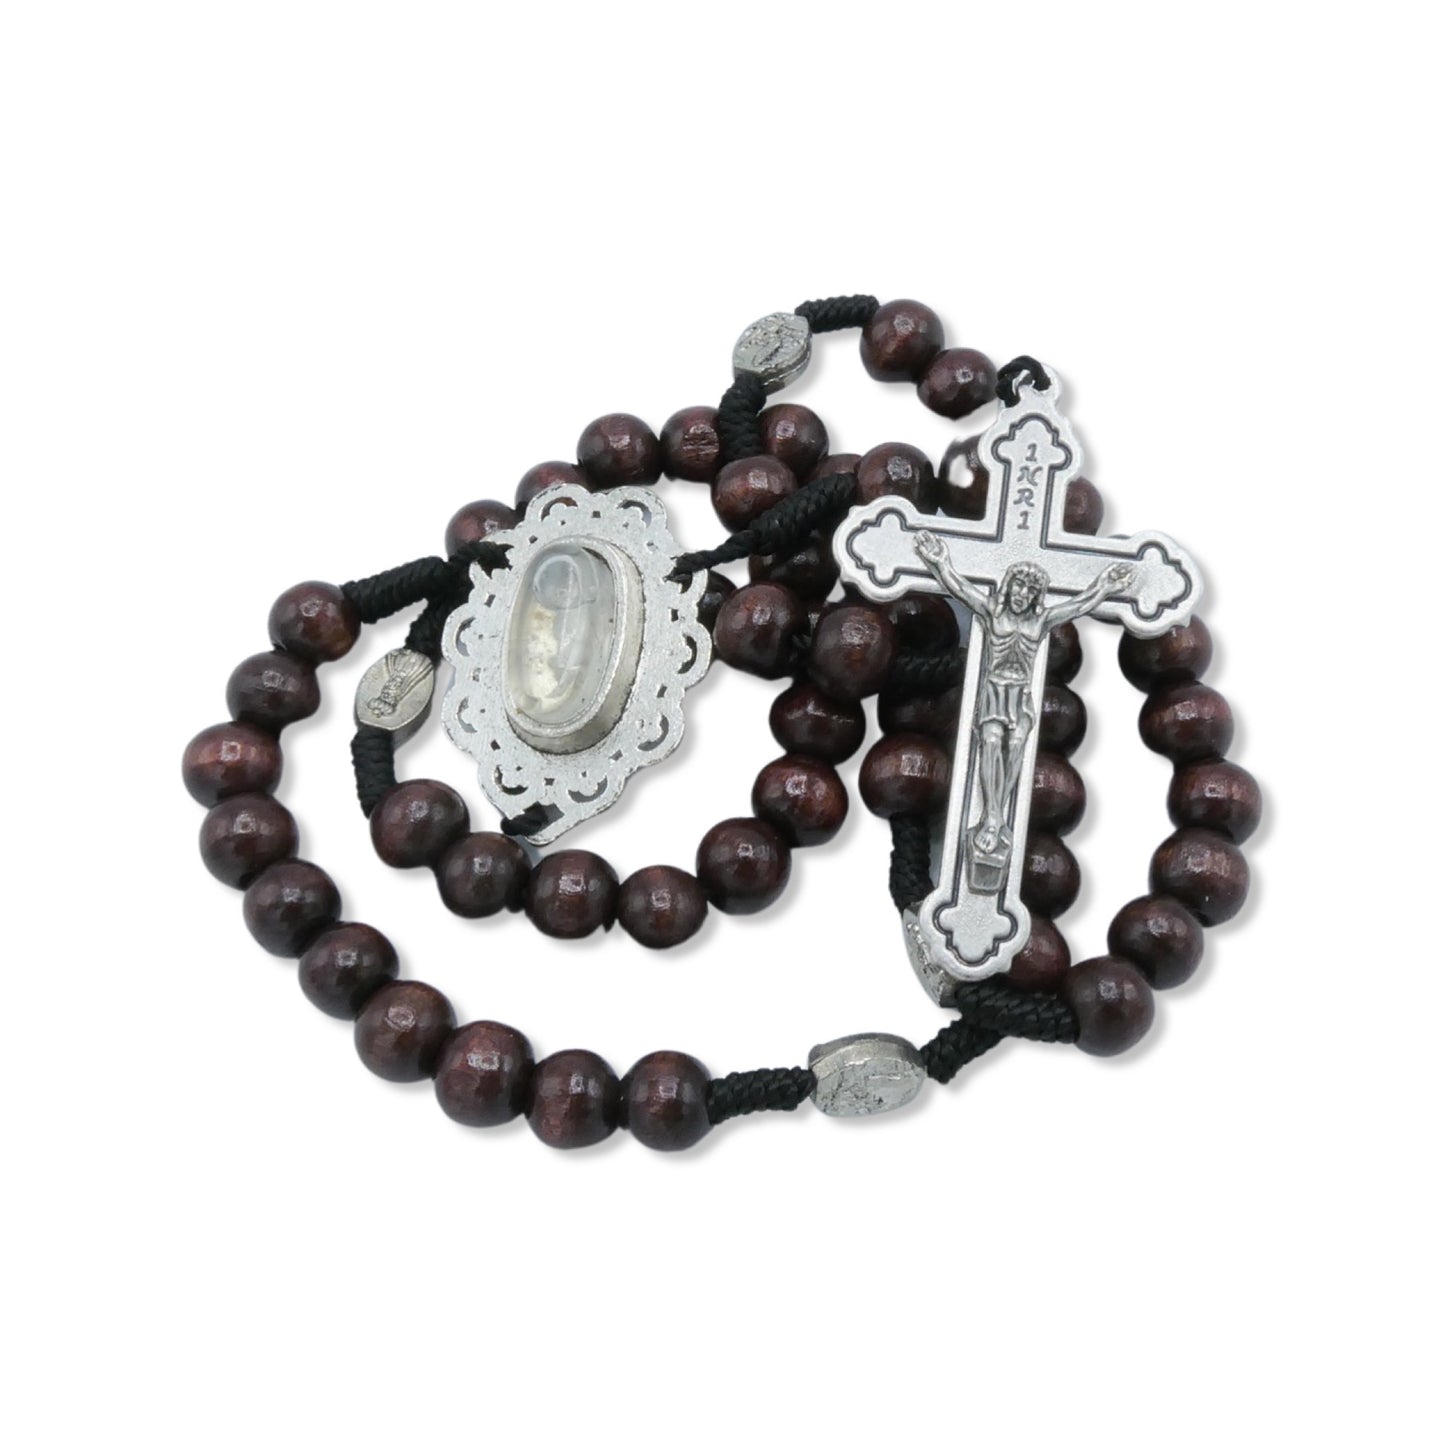 Embellished Fatima Rosary with Water